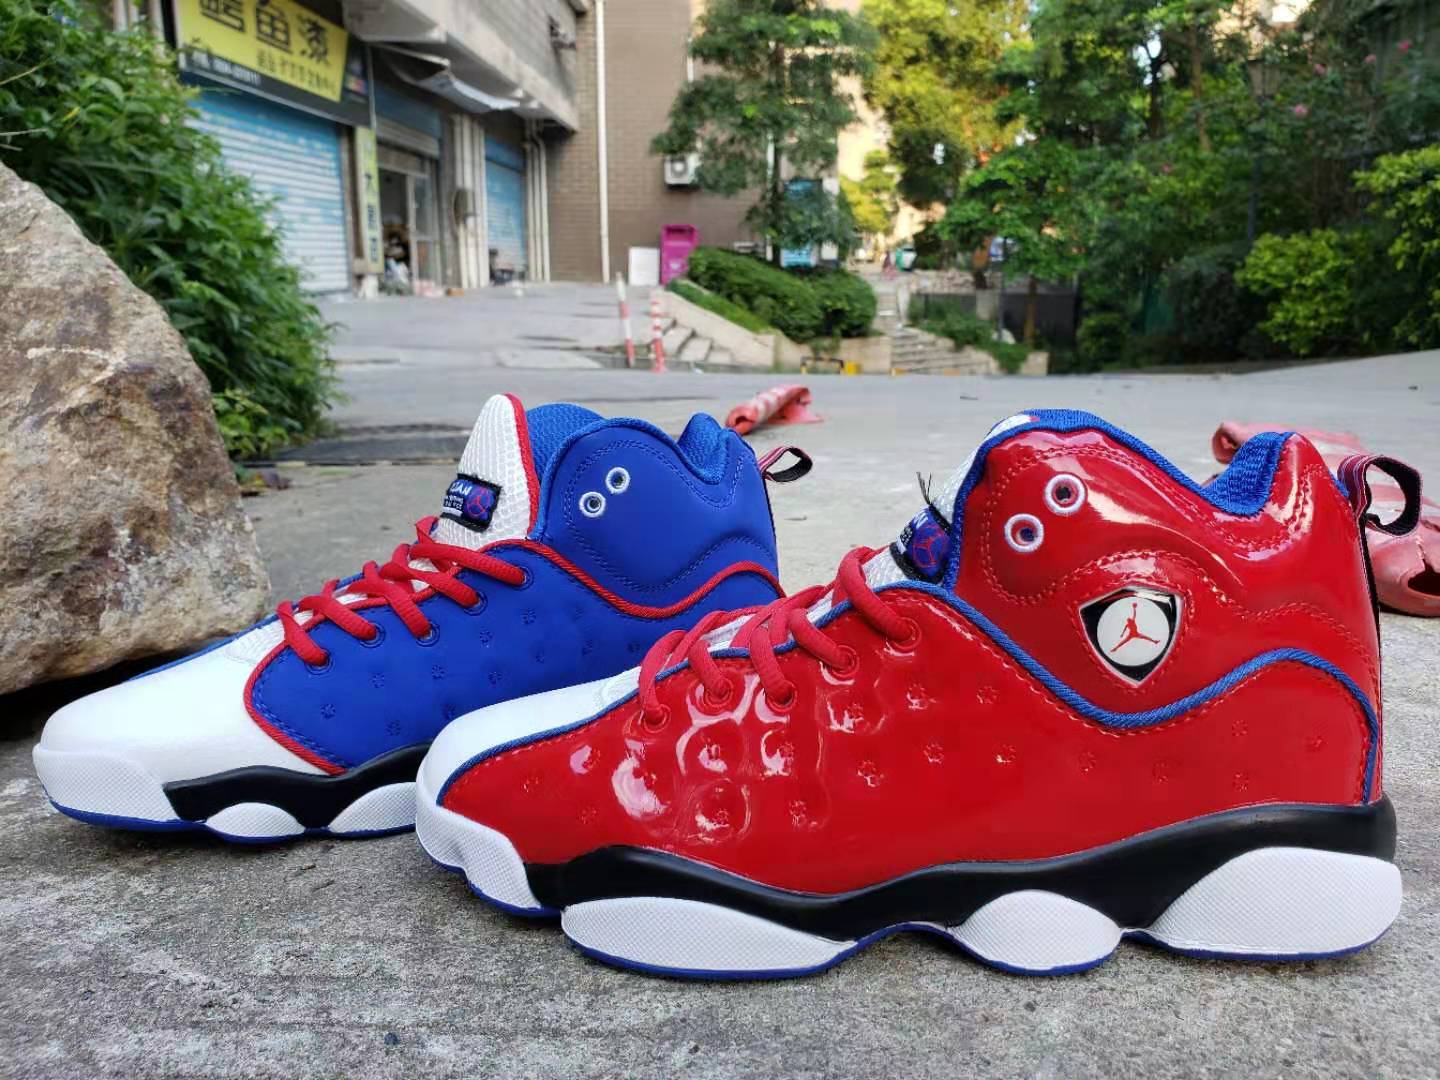 red and blue jordan shoes